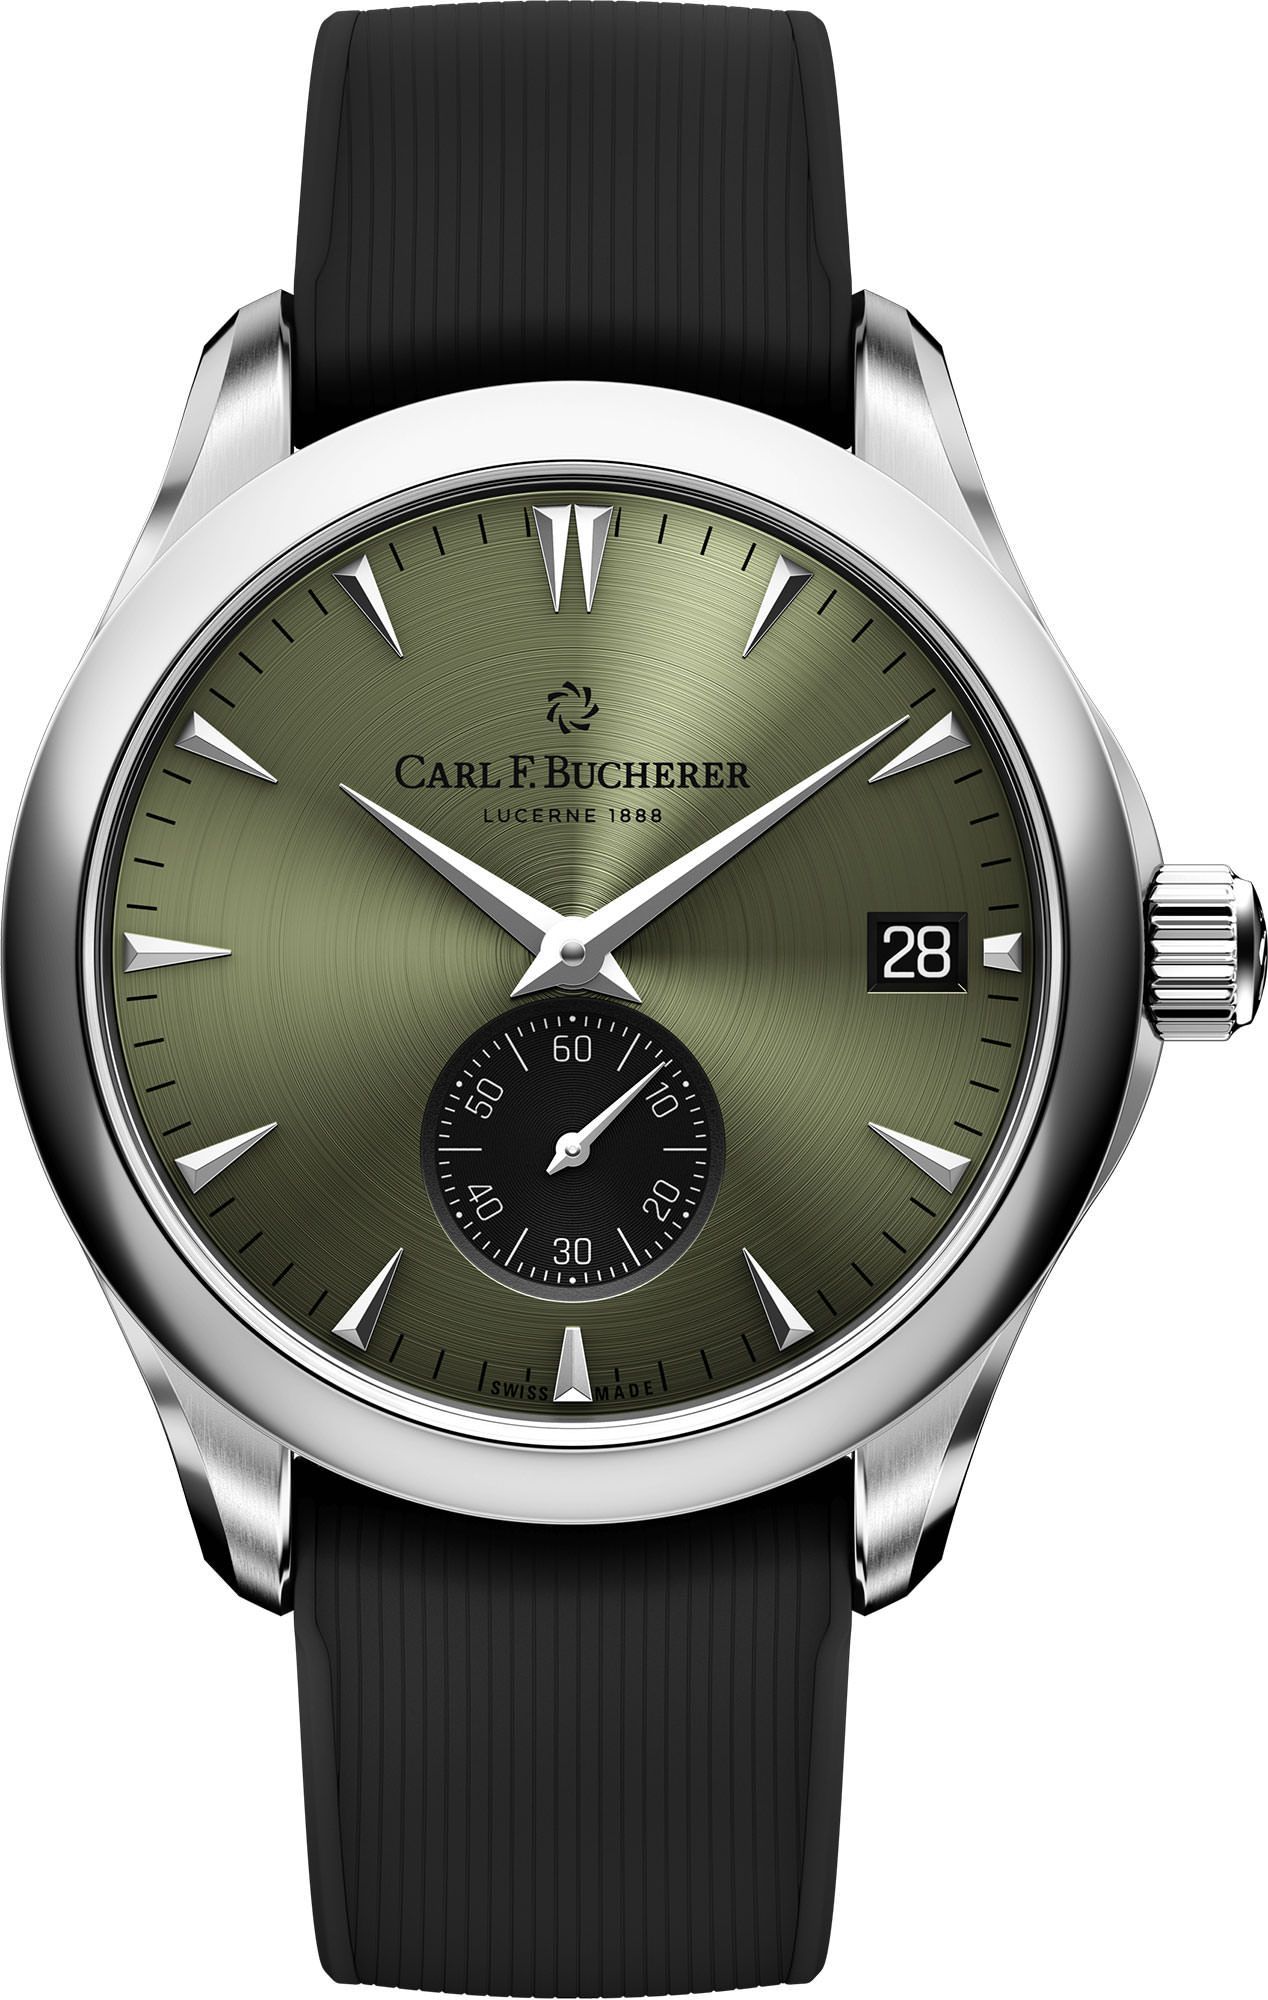 Carl F. Bucherer Manero Peripheral Green Dial 40.6 mm Automatic Watch For Men - 1